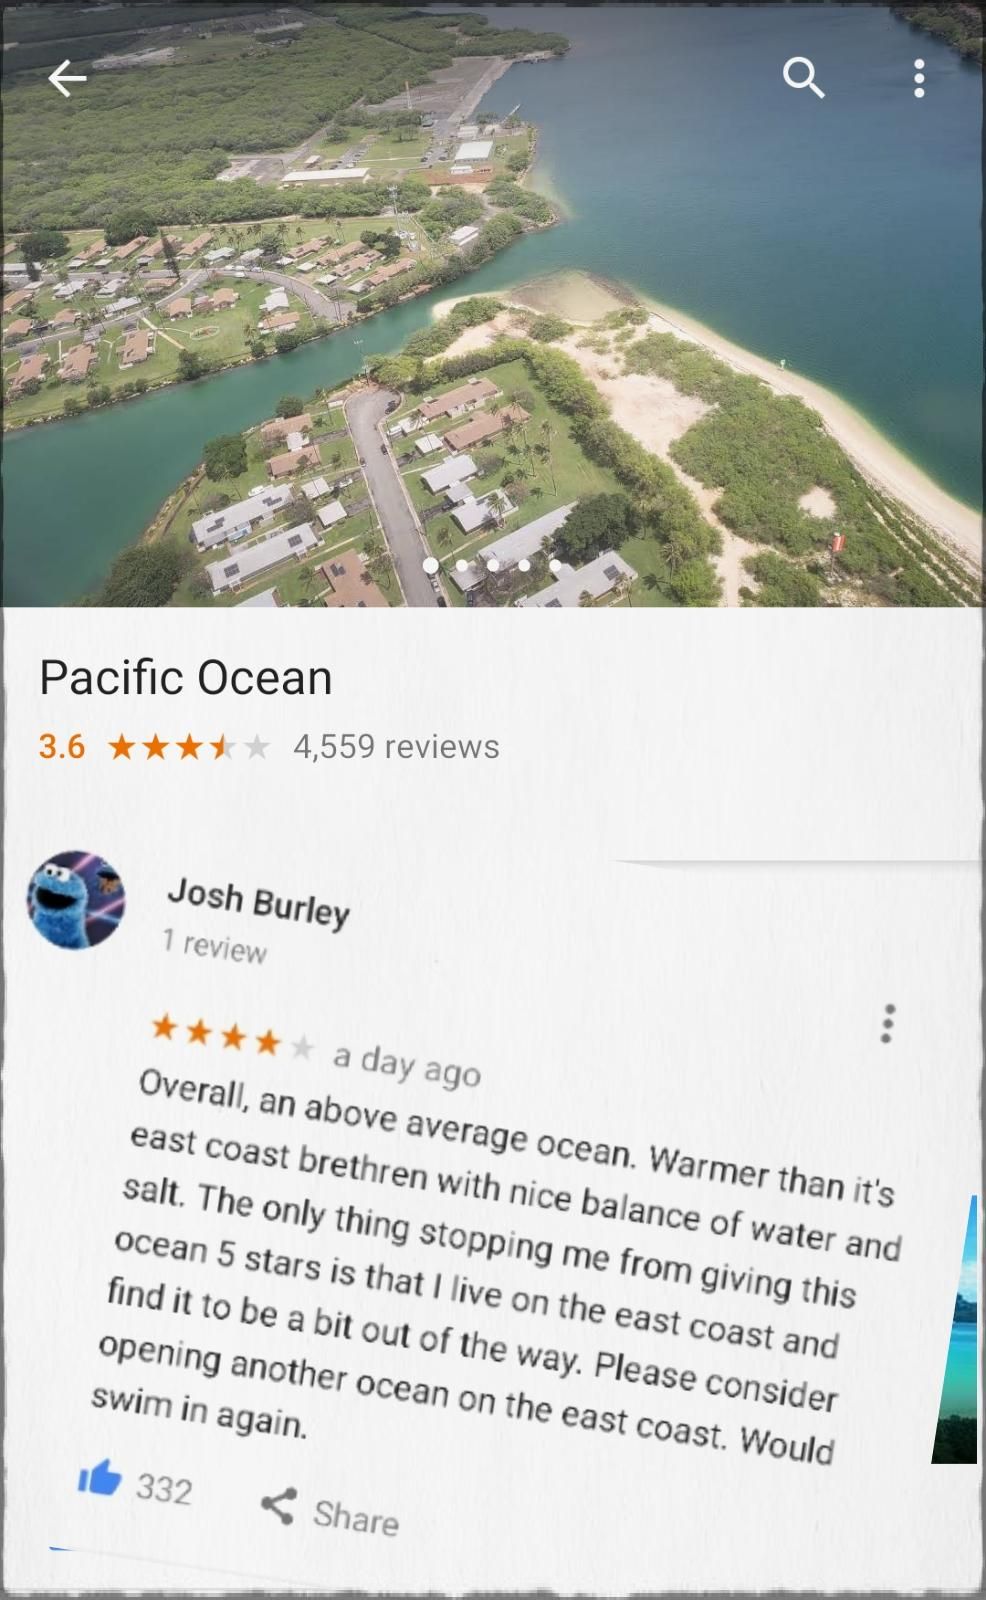 So people started reviewing the Pacific Ocean, and it's fantastic.